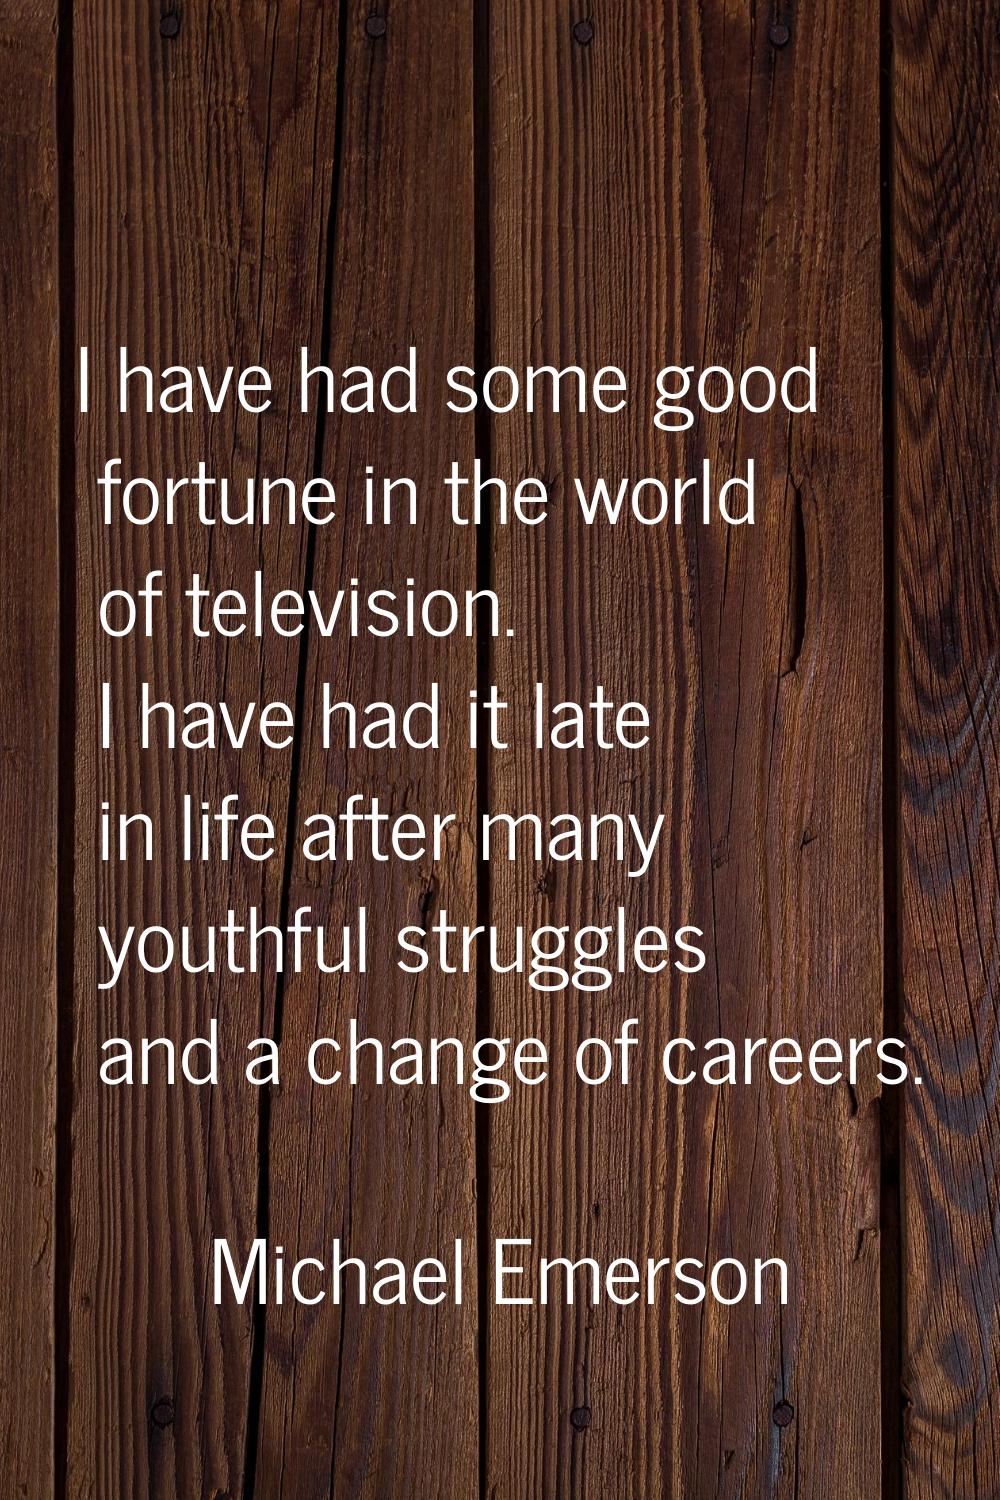 I have had some good fortune in the world of television. I have had it late in life after many yout